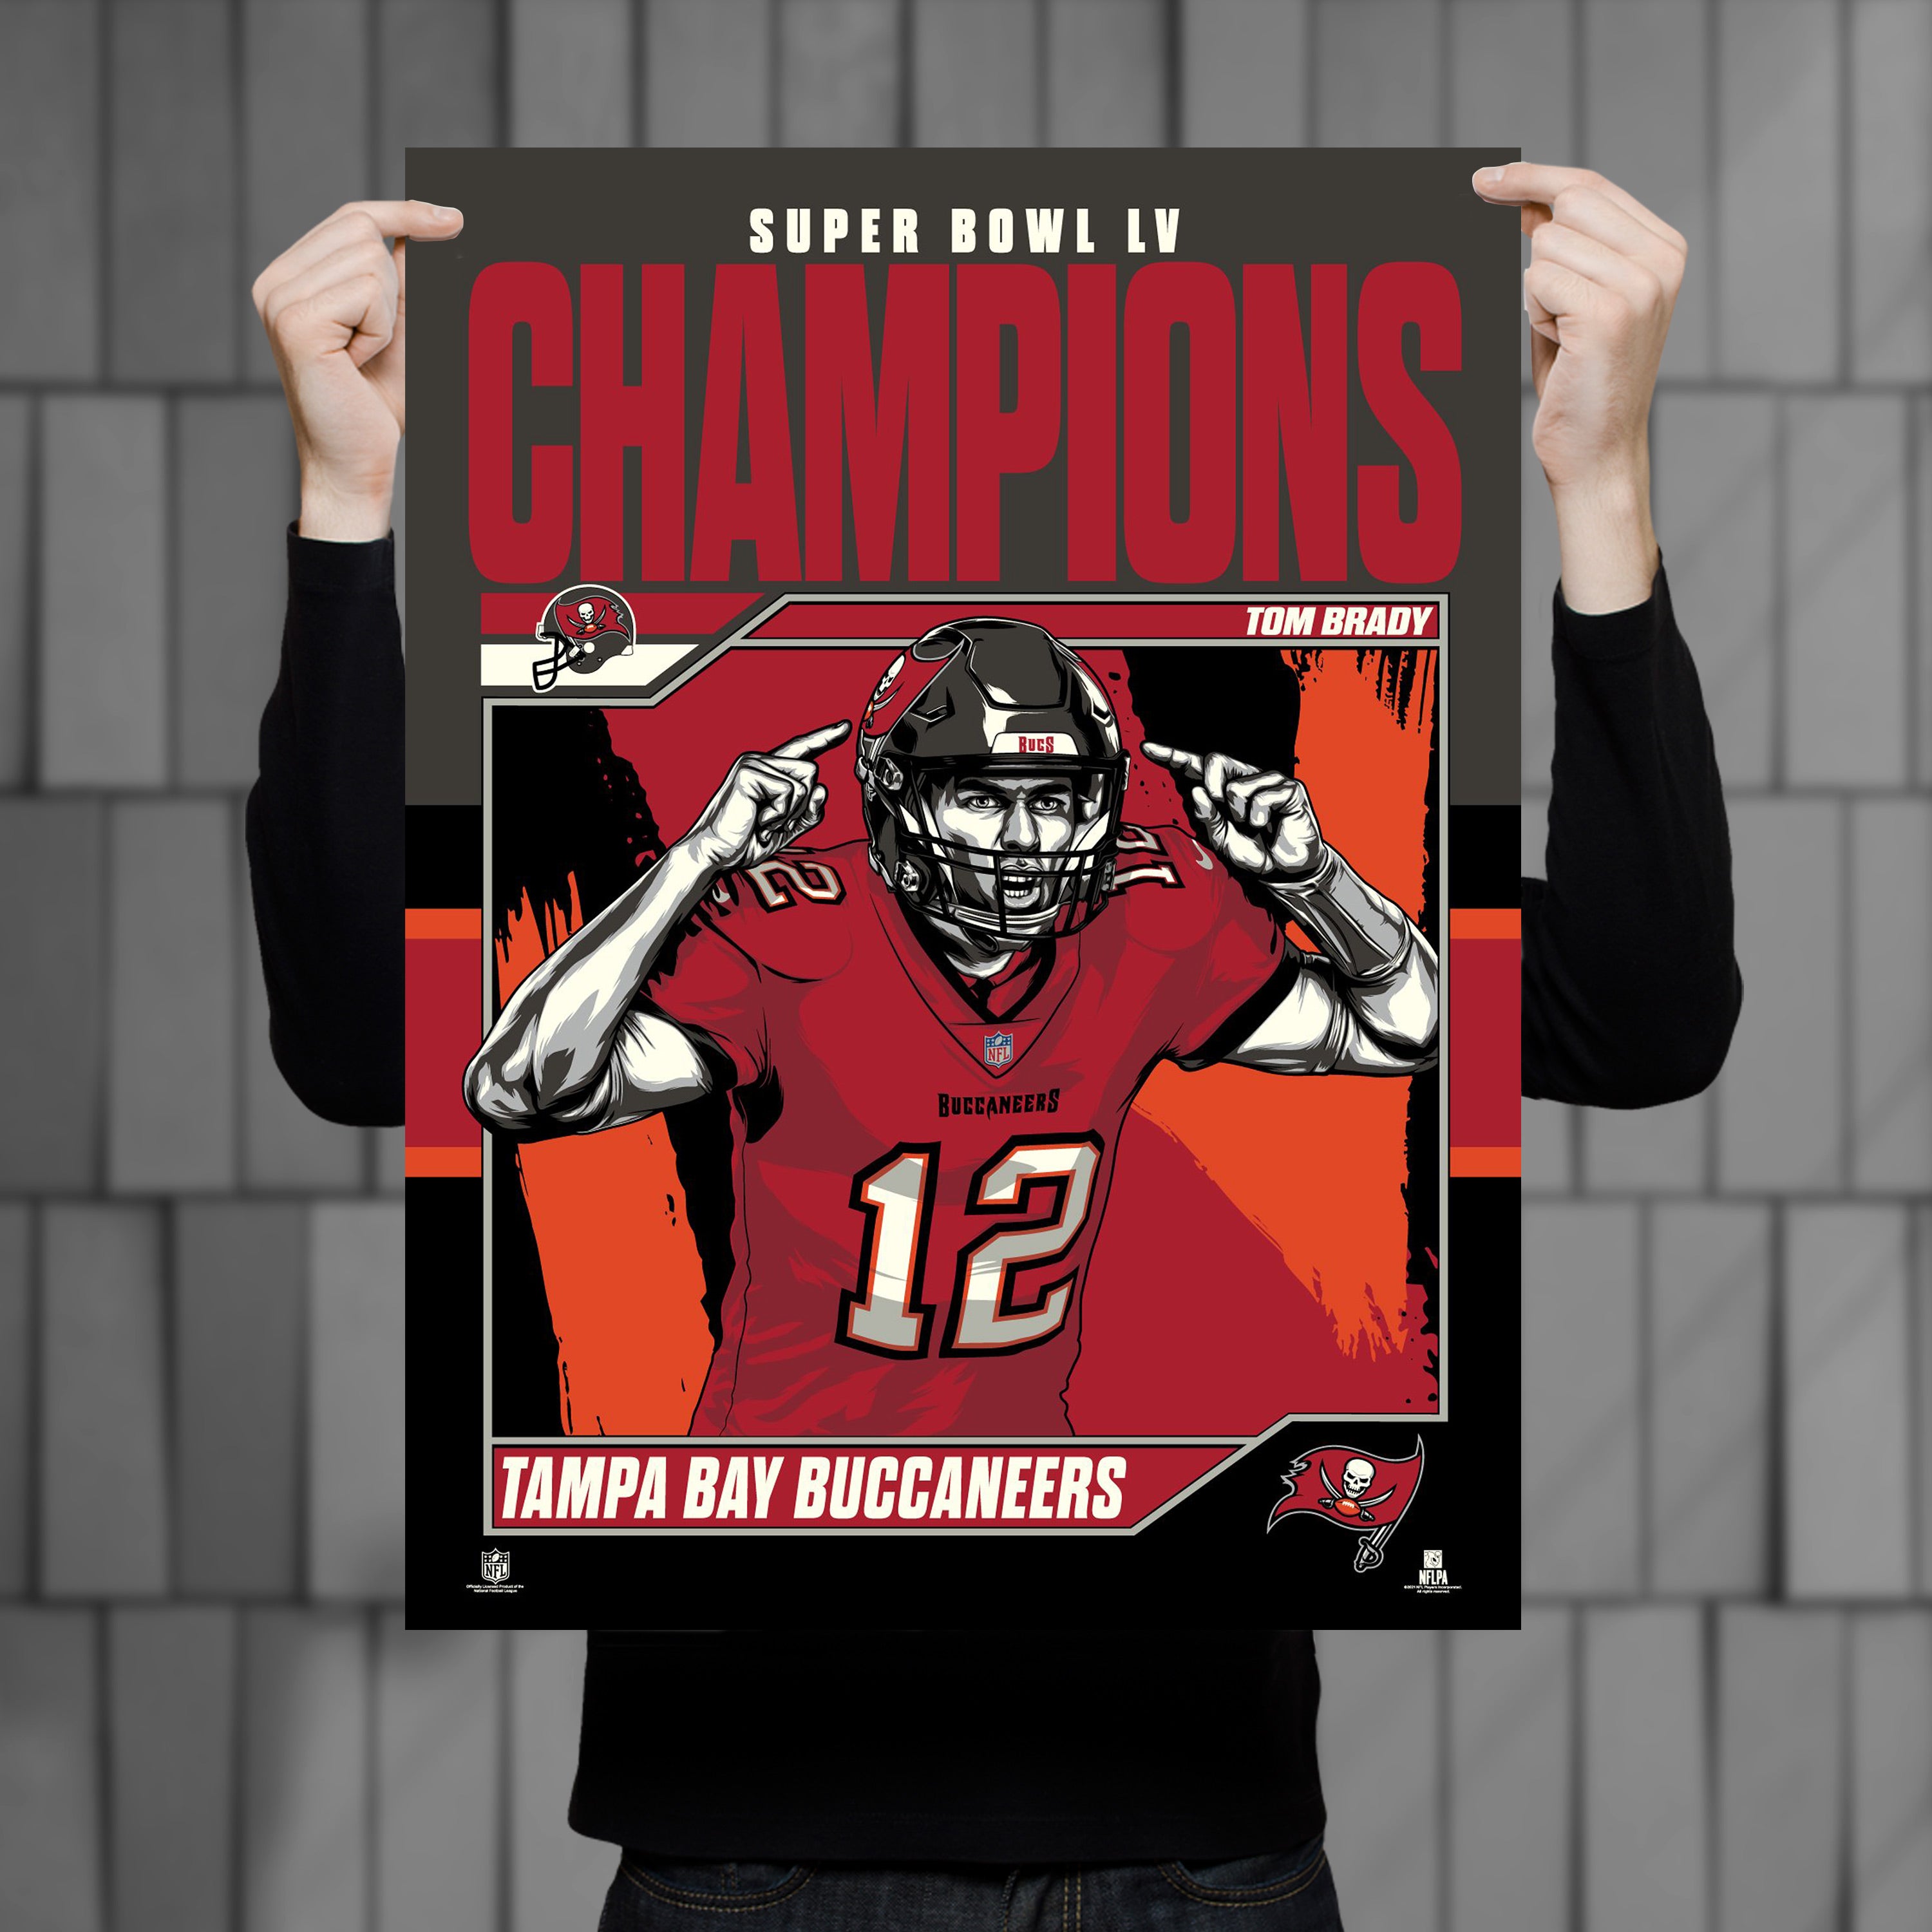 Tampa Bay Buccaneers 2021 Super Bowl LV Champs Football Rug - 20.5